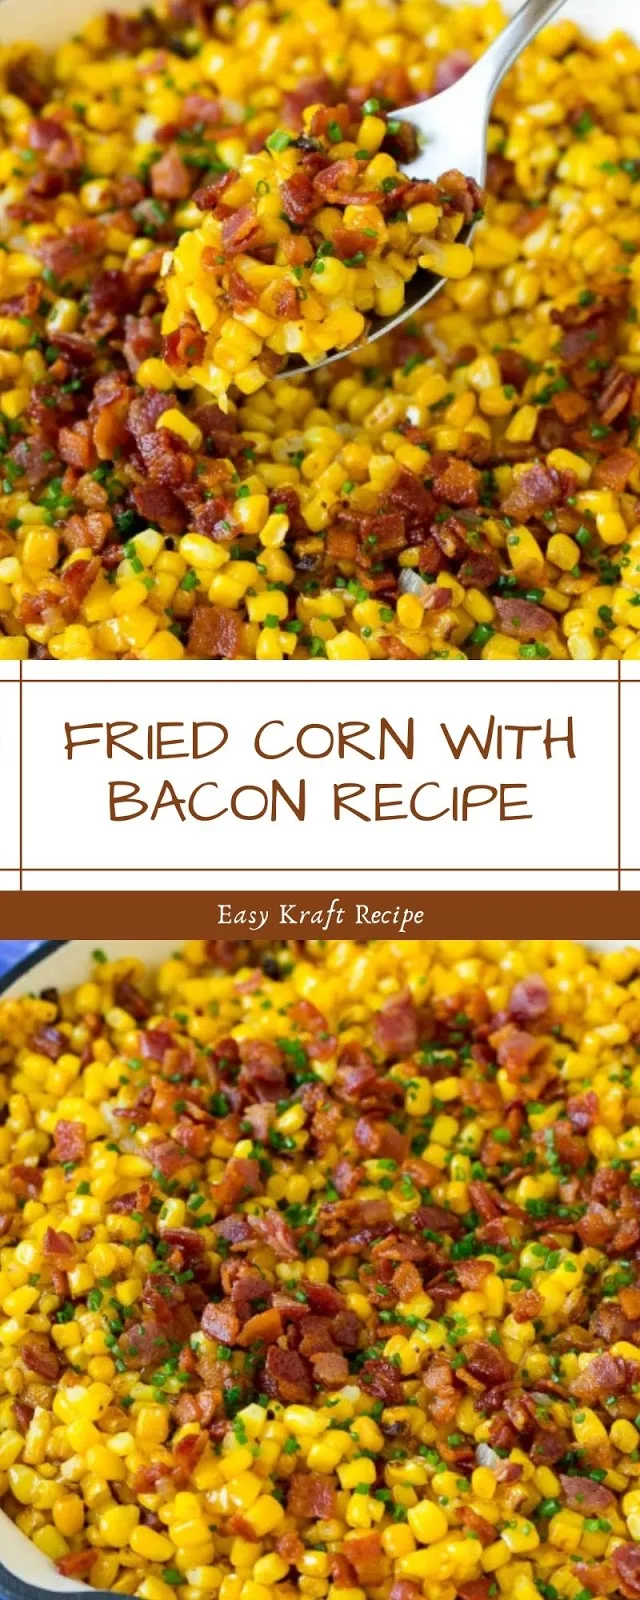 FRIED CORN WITH BACON RECIPE